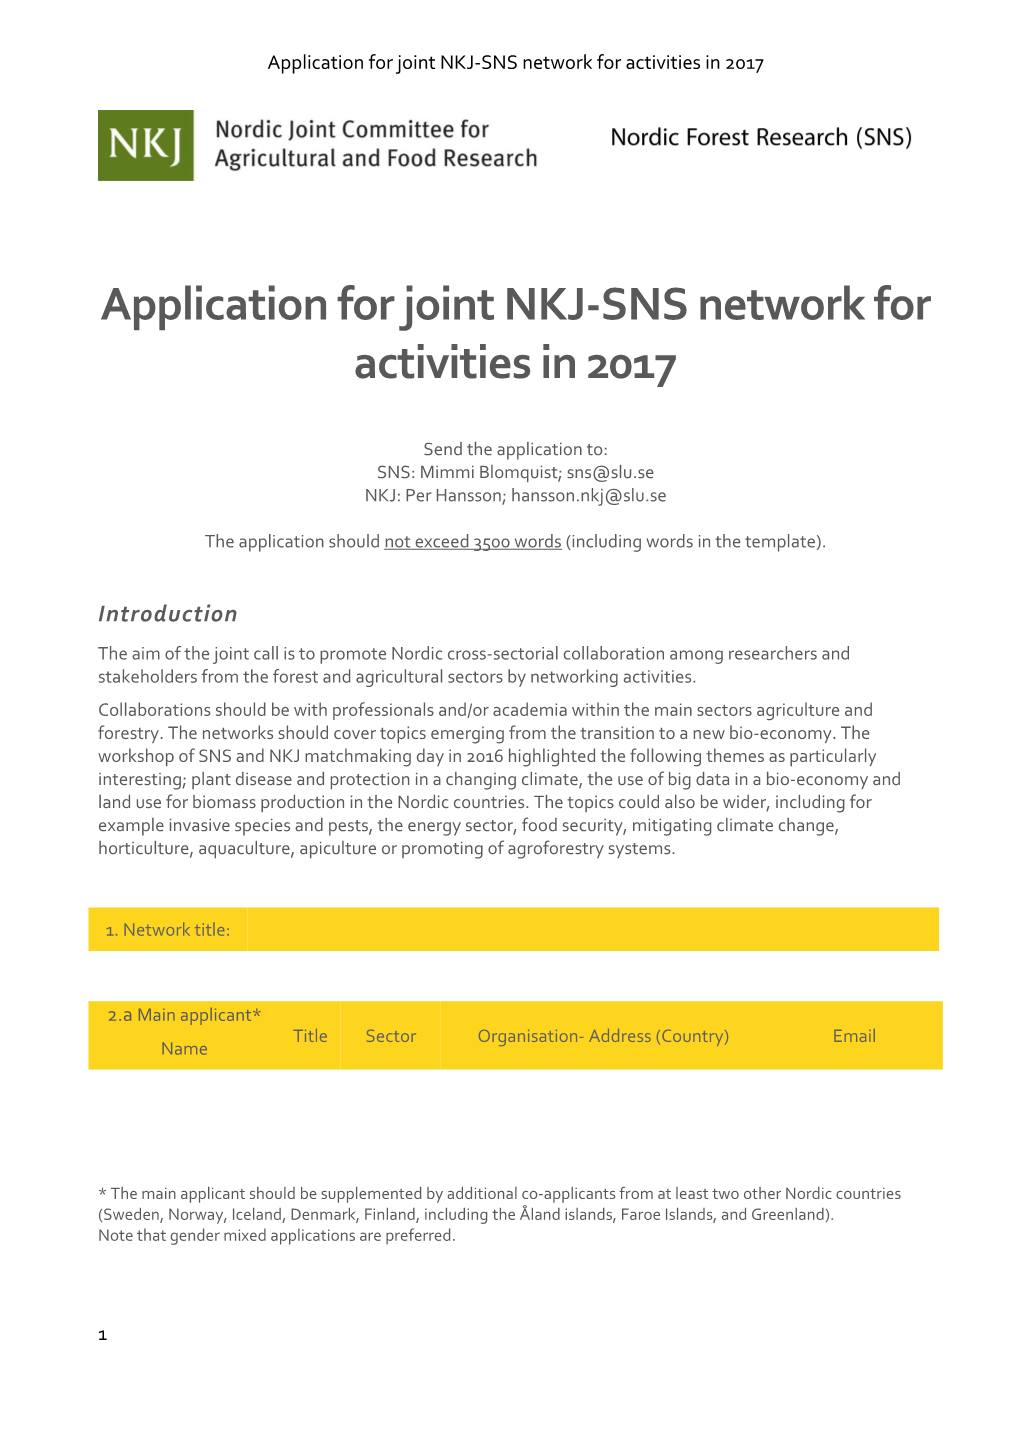 Application for Joint NKJ-SNS Network for Activities in 2017